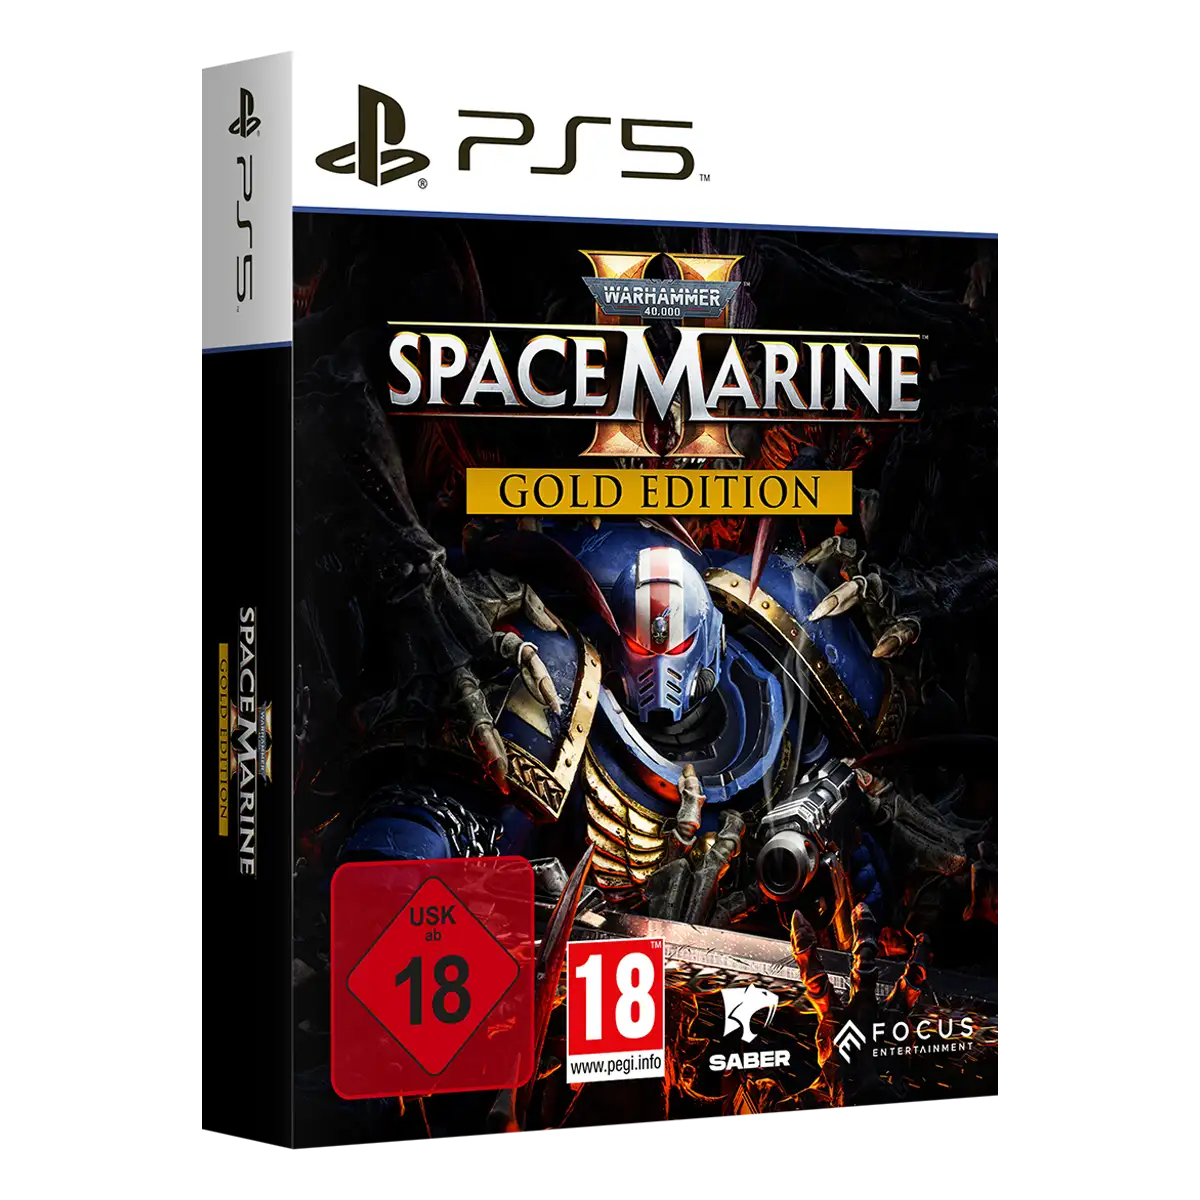 Warhammer 40,000: Space Marine 2 Gold Edition (PS5) Cover